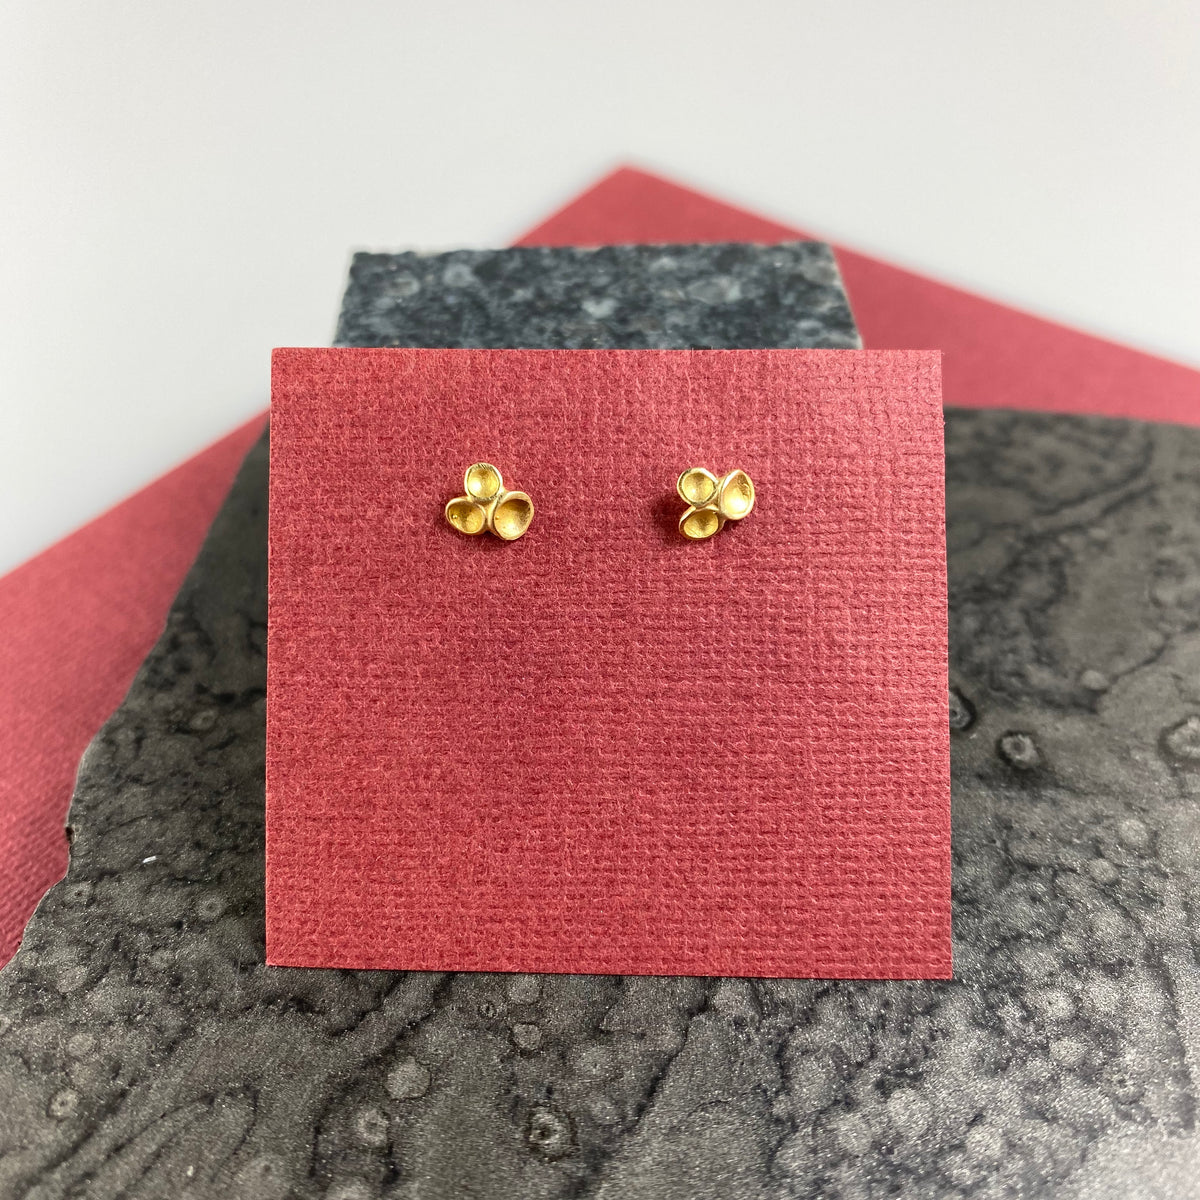 Petite Tripod Post Earrings in Gold Vermeil - Heart of the Home PA